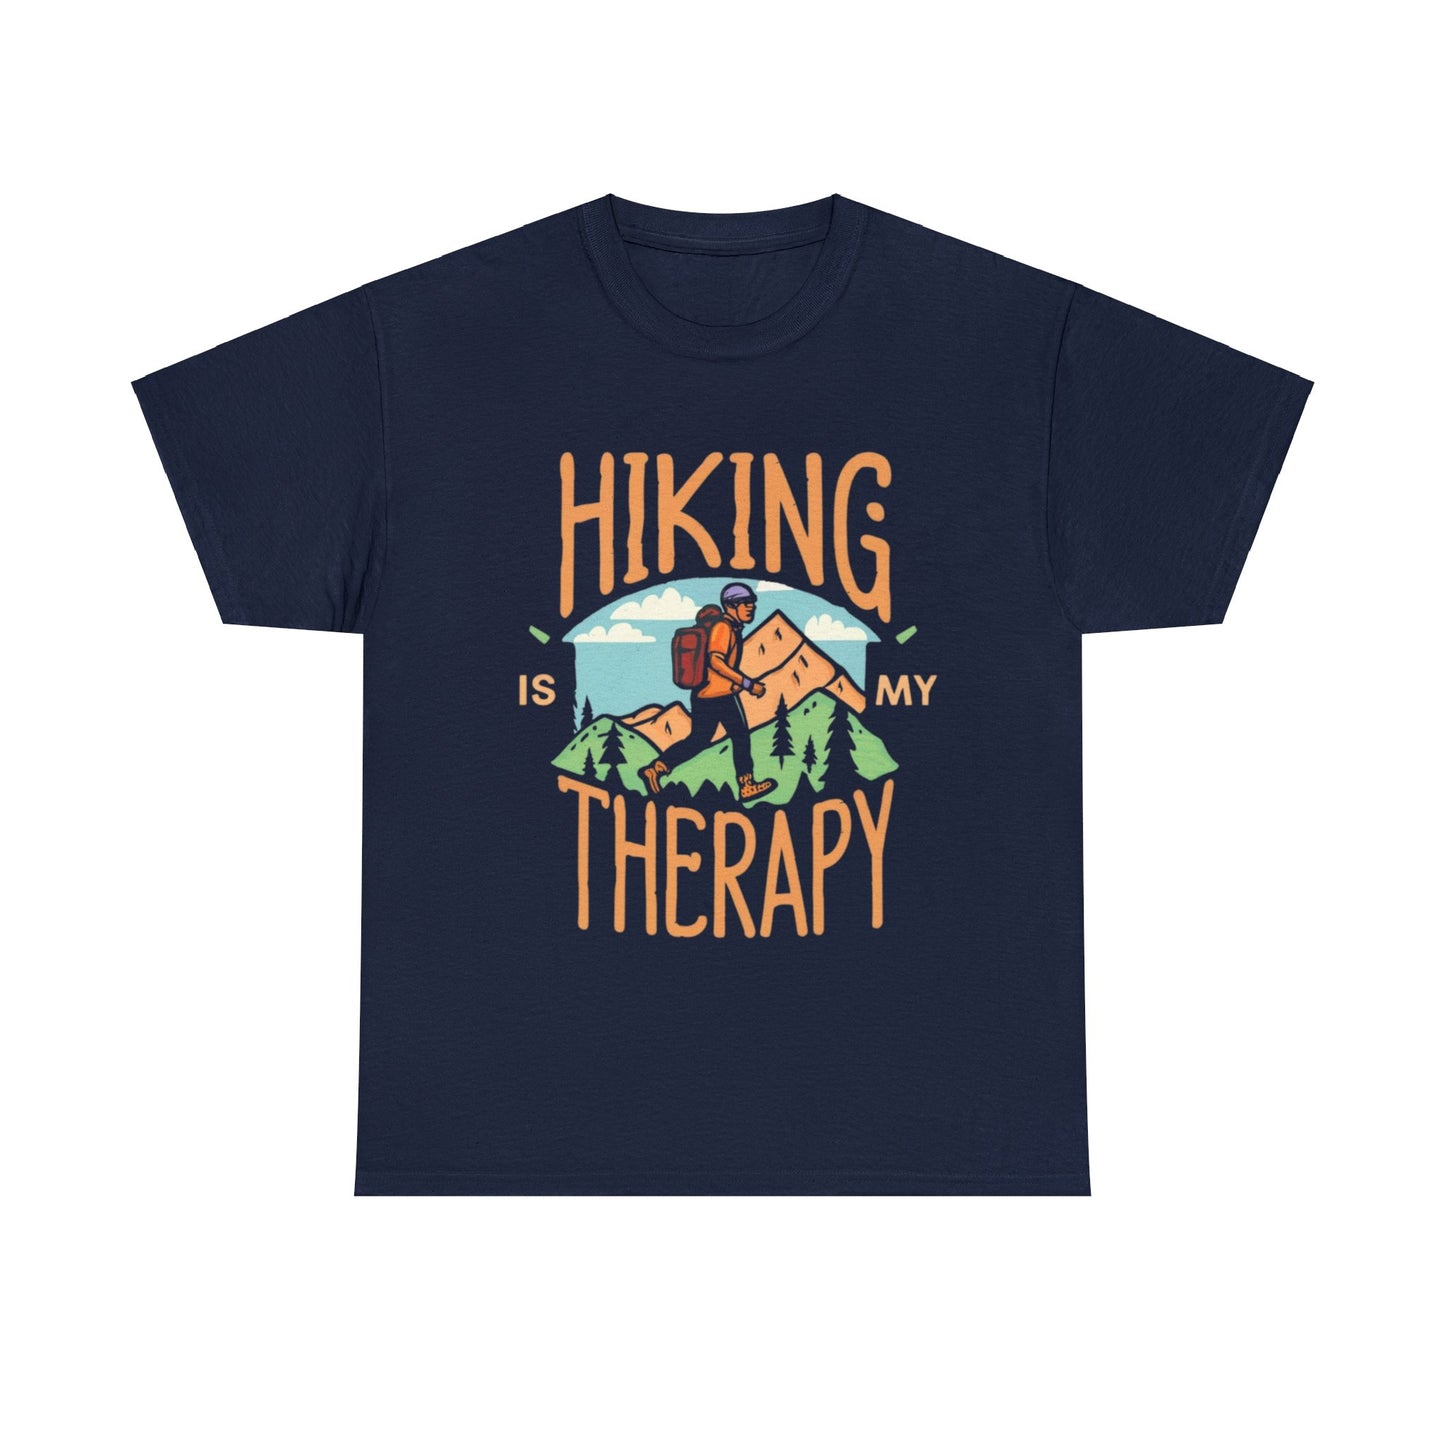 Hiking Is My Therapy - T-Shirt - NOT SOLD IN STORES - Gift for Hikers, Valentine's Day, Birthday, Mother's Day, Father's Day